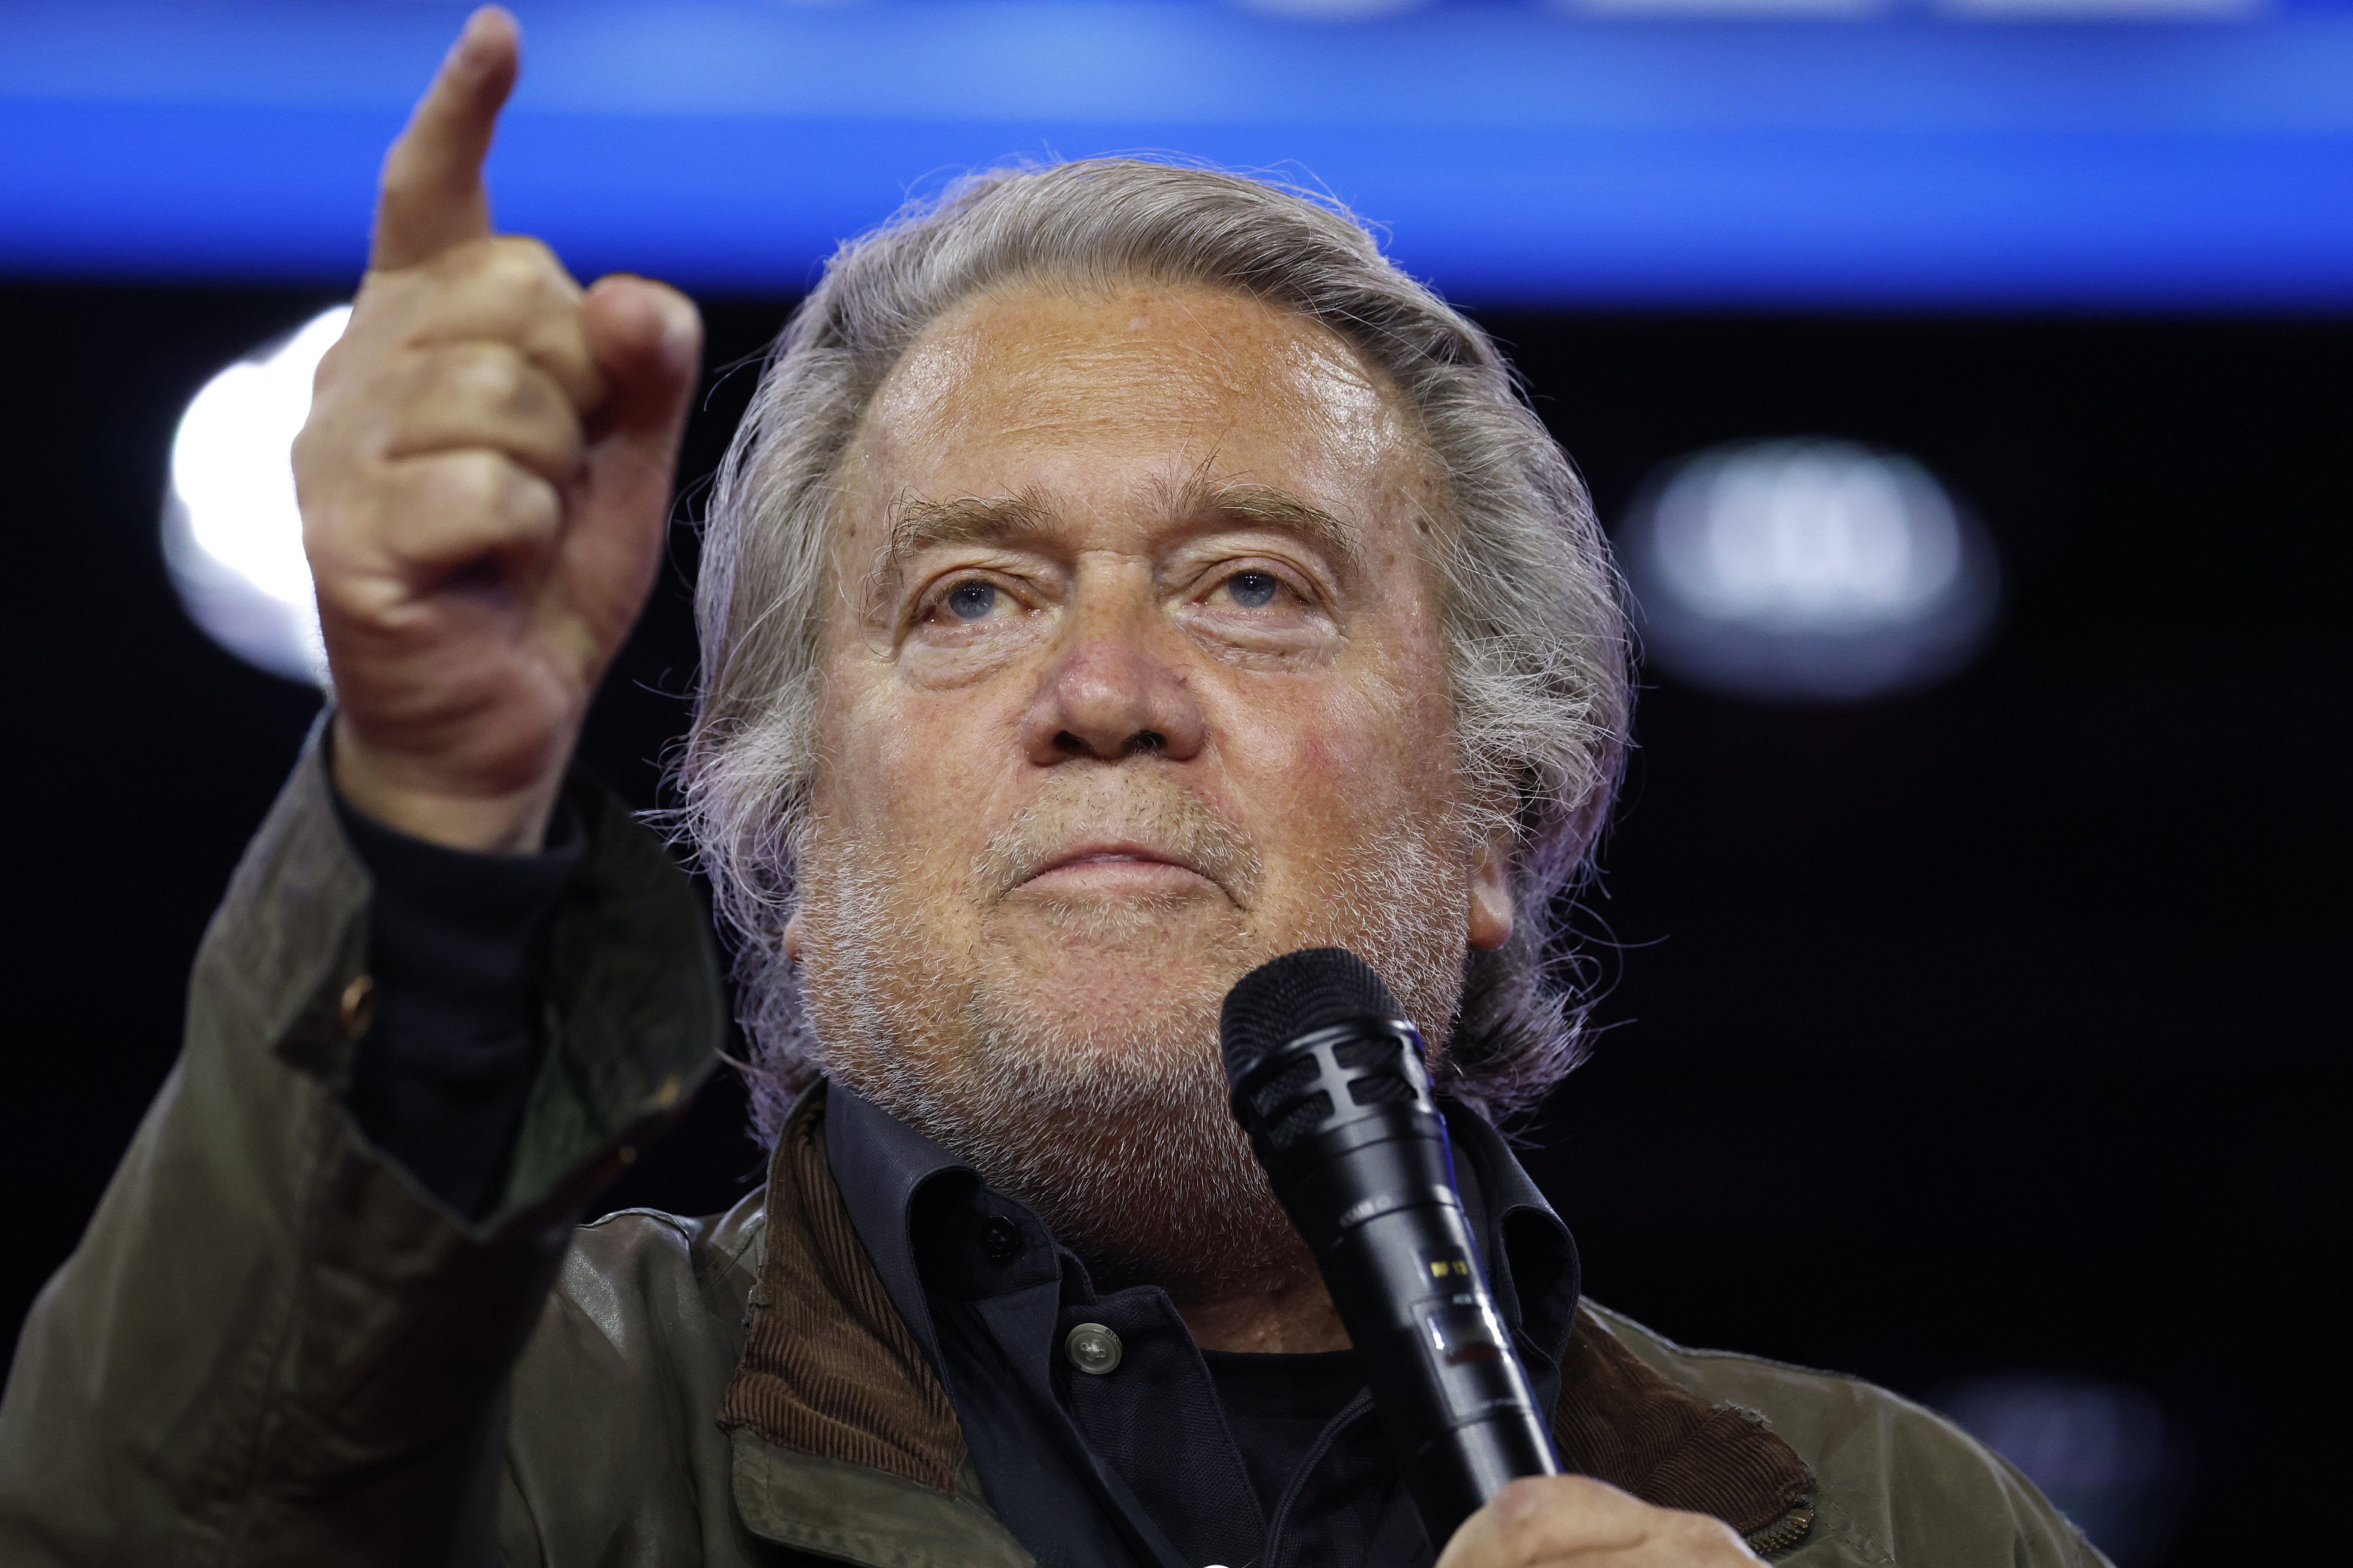 Steve Bannon trashes “meaningless” Donald Trump event